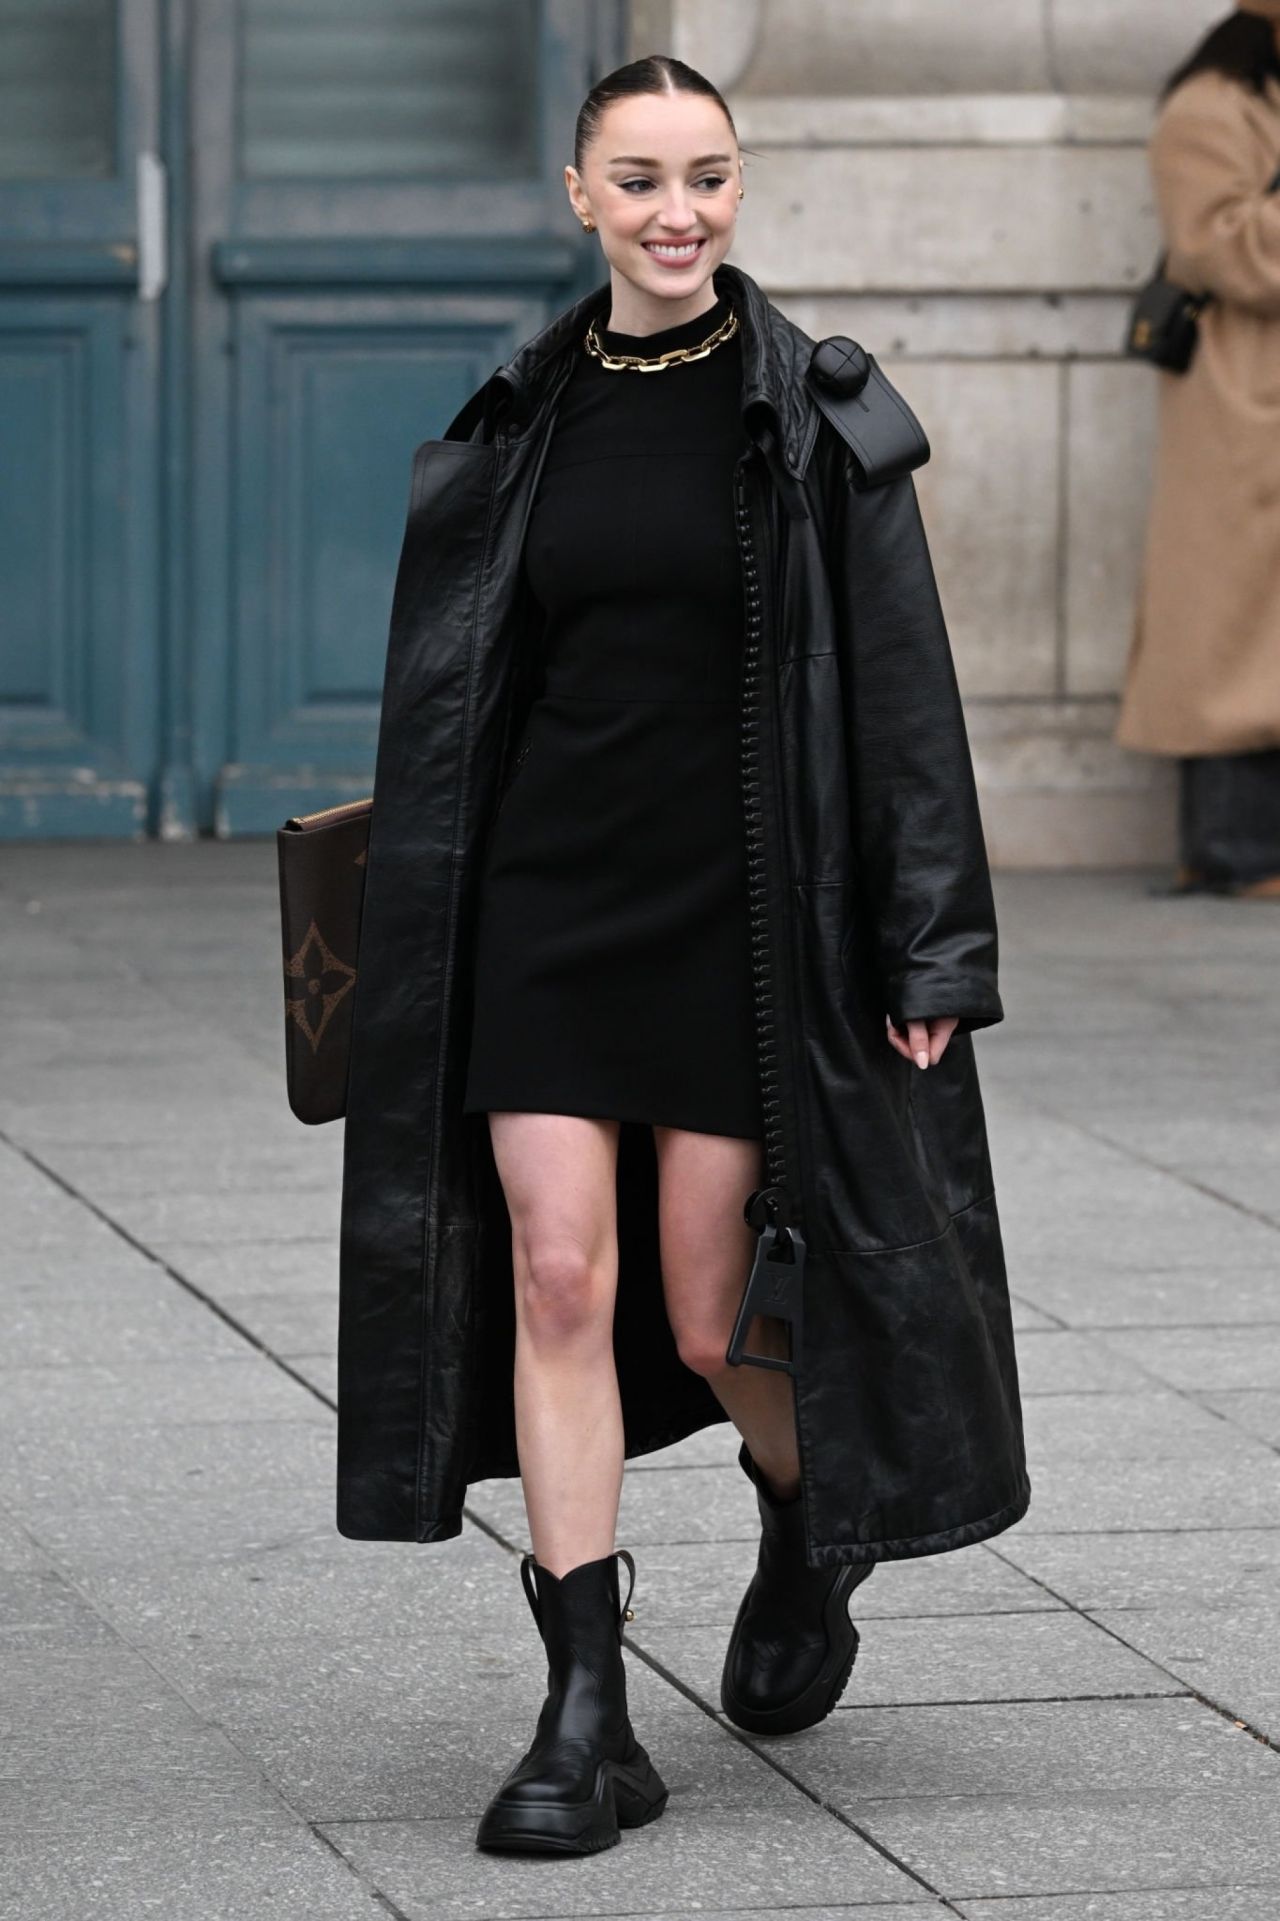 Phoebe Dynevor Louis Vuitton Show March 6, 2023 – Star Style